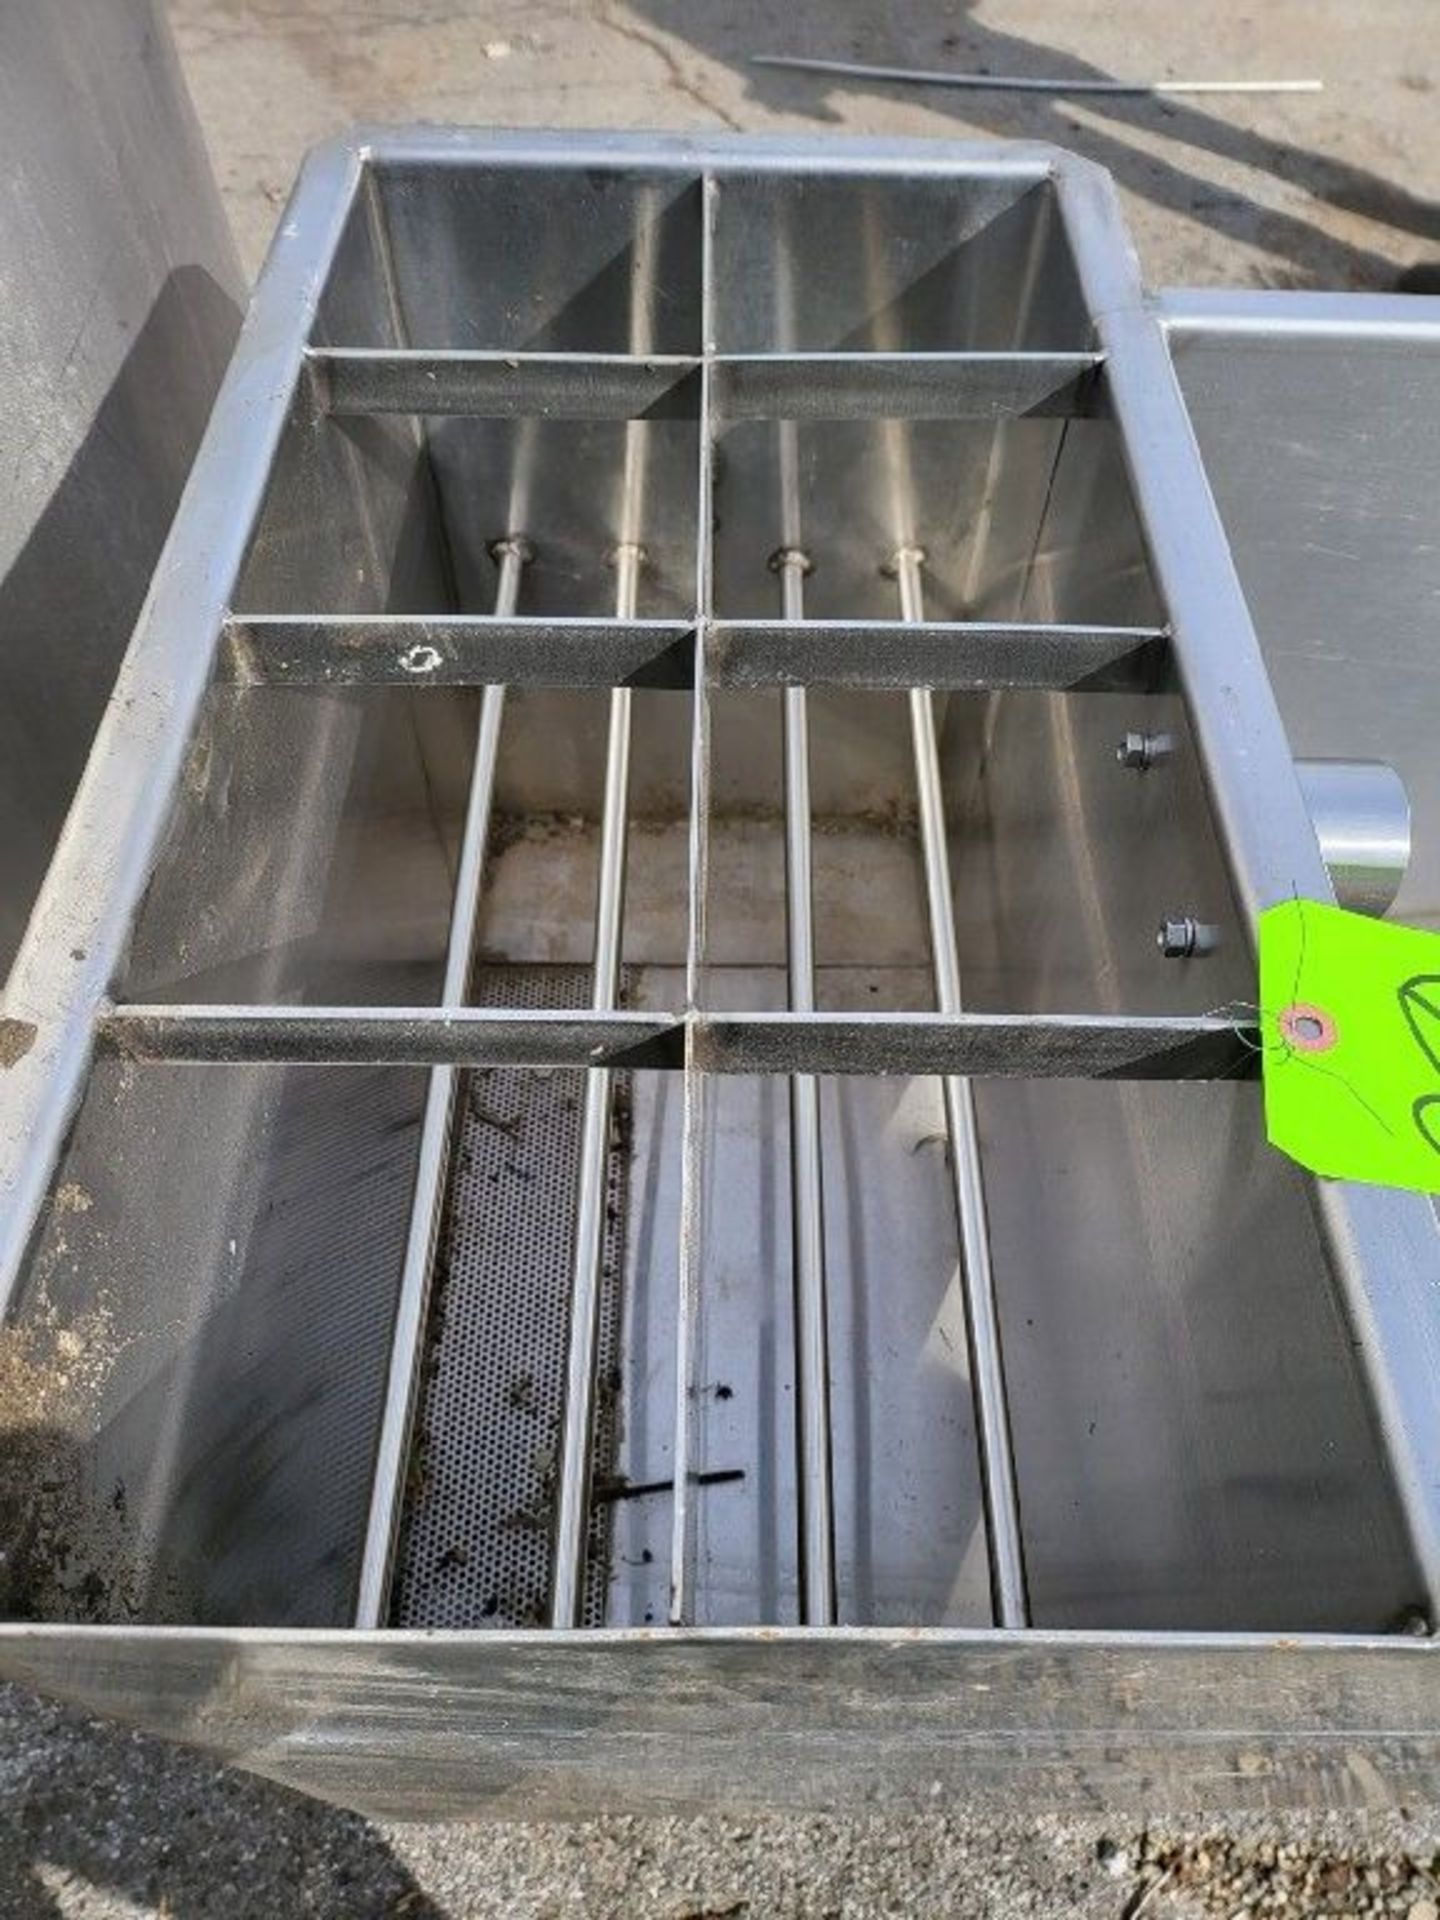 Qty (1) COP Wash Bay Trough - All Stainless Steel COP Was Bay Trough - Dimensions 68"L x 24"W x 36" - Image 3 of 3